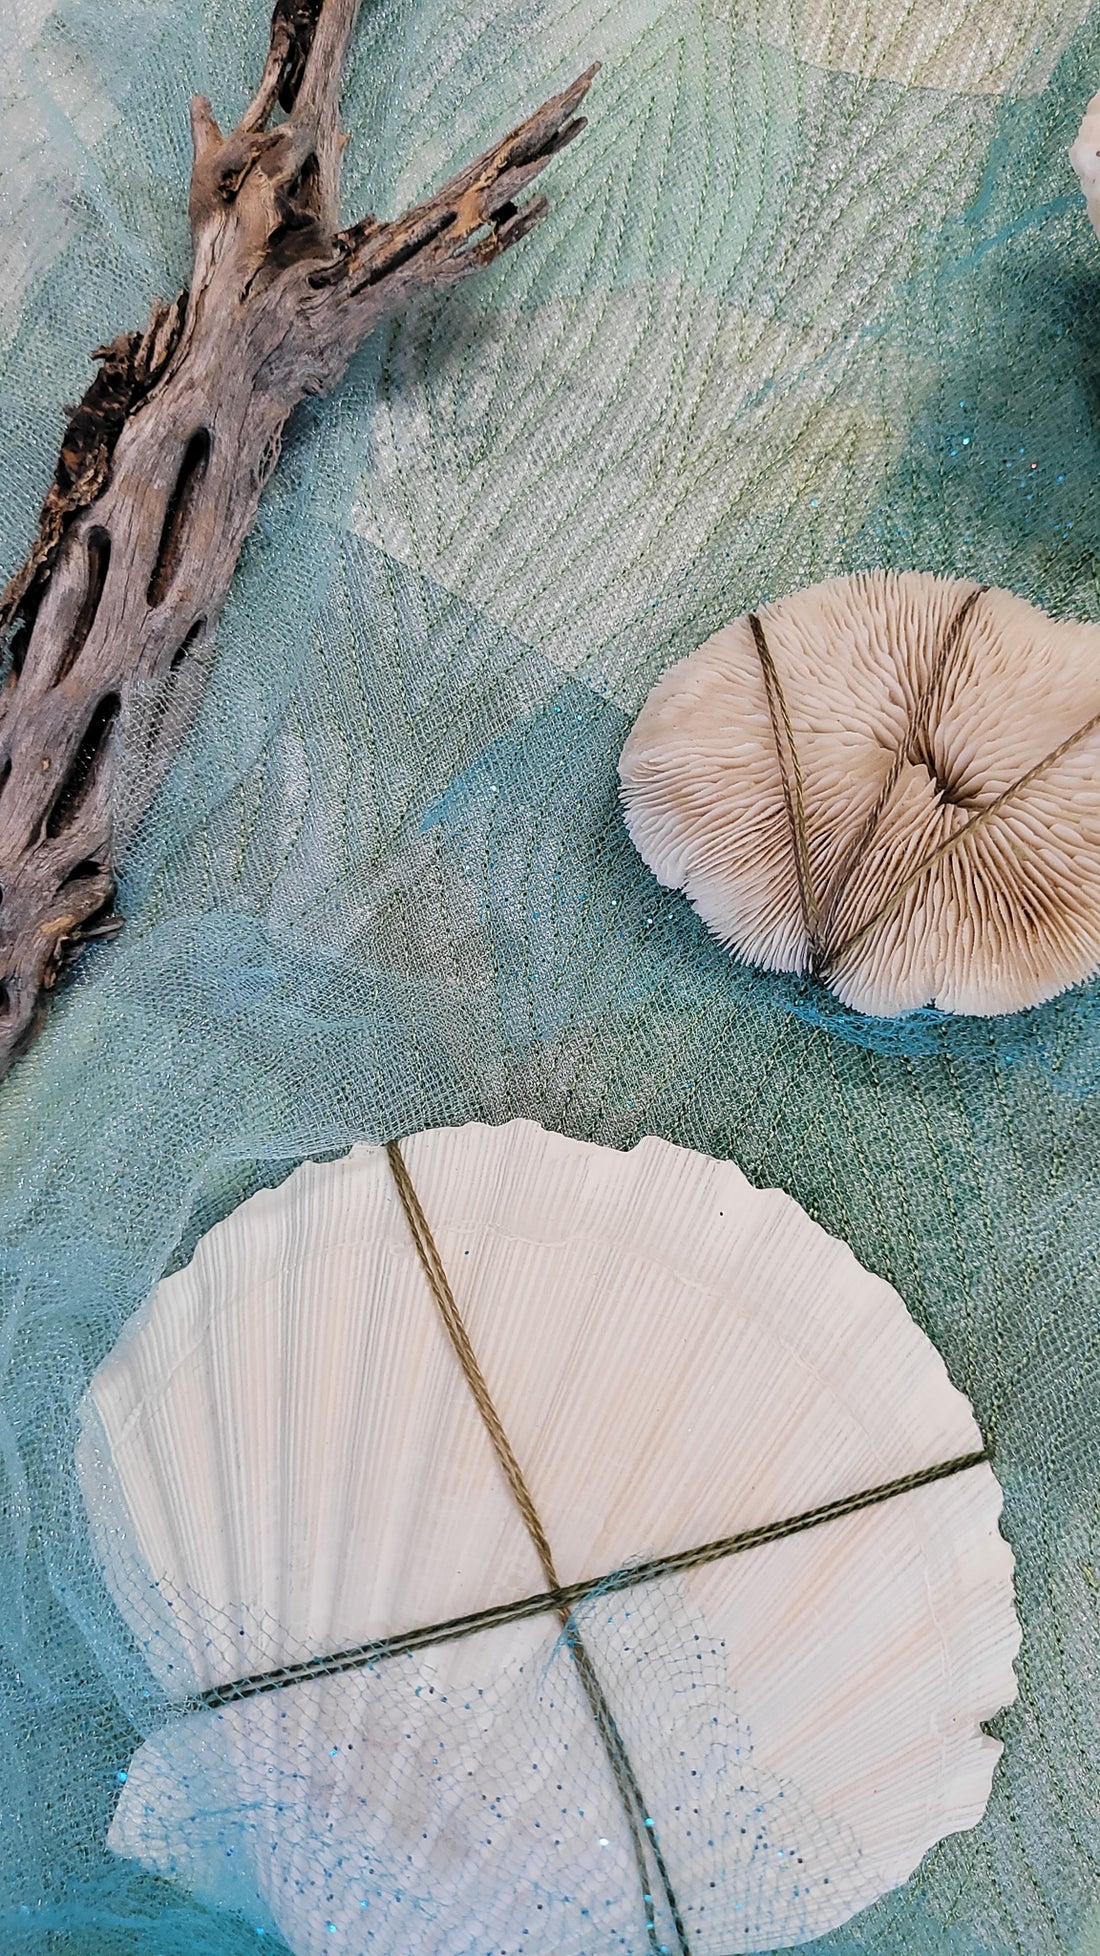 Art quilt with mixed media embellishment of cholla cactus, scallop shell, and coral. with metallic hand stitching.